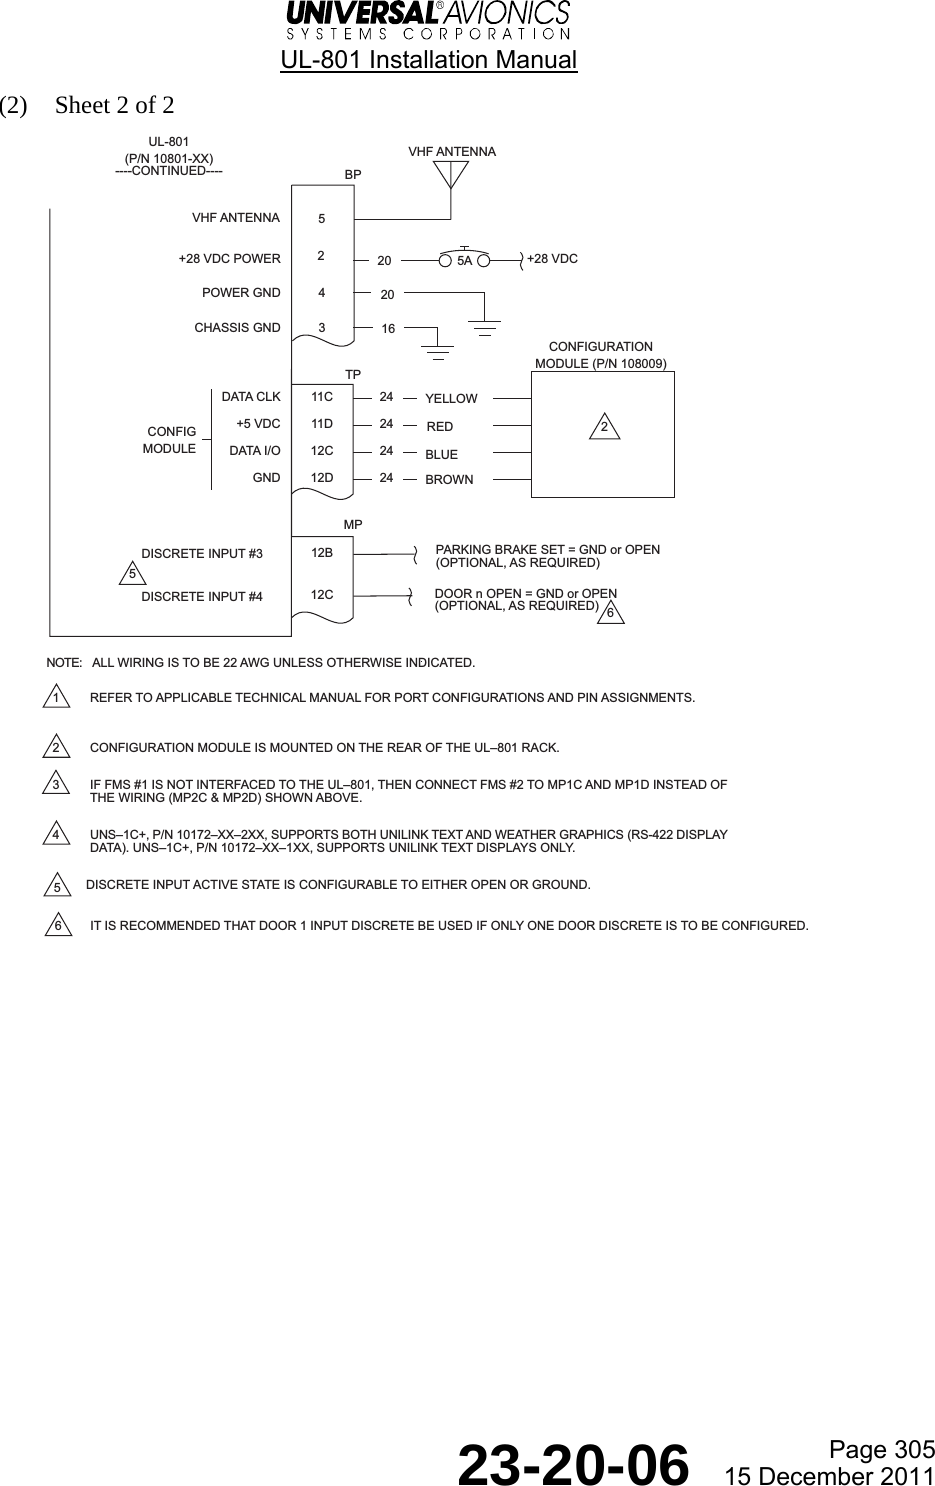  UL-801 Installation Manual  Page 305  23-20-06  15 December 2011 (2) Sheet 2 of 2   MPBP+28 VDC POWER +28 VDCPOWER GND 4CHASSIS GND 3TPDATA CLK 11CCONFIGURATIONMODULE (P/N 108009)24+5 VDC 11D 24DATA I/O 12C 24GND 12D 24CONFIGMODULEDISCRETE INPUT #3 12B PARKING BRAKE SET = GND or OPEN(OPTIONAL, AS REQUIRED)DISCRETE INPUT #4 12C DOOR n OPEN = GND or OPEN(OPTIONAL, AS REQUIRED)YELLOWREDBLUEBROWN202165A22020561 REFER TO APPLICABLE TECHNICAL MANUAL FOR PORT CONFIGURATIONS AND PIN ASSIGNMENTS.2 CONFIGURATION MODULE IS MOUNTED ON THE REAR OF THE UL801 RACK.3 IF FMS #1 IS NOT INTERFACED TO THE UL801, THEN CONNECT FMS #2 TO MP1C AND MP1D INSTEAD OFTHE WIRING (MP2C &amp; MP2D) SHOWN ABOVE.4 UNS1C+, P/N 10172XX2XX, SUPPORTS BOTH UNILINK TEXT AND WEATHER GRAPHICS (RS-422 DISPLAYDATA). UNS1C+, P/N 10172XX1XX, SUPPORTS UNILINK TEXT DISPLAYS ONLY.DISCRETE INPUT ACTIVE STATE IS CONFIGURABLE TO EITHER OPEN OR GROUND.5IT IS RECOMMENDED THAT DOOR 1 INPUT DISCRETE BE USED IF ONLY ONE DOOR DISCRETE IS TO BE CONFIGURED.6ALL WIRING IS TO BE 22 AWG UNLESS OTHERWISE INDICATED.NOTE:UL-801(P/N 10801-XX)----CONTINUED----VHF ANTENNA5VHF ANTENNA